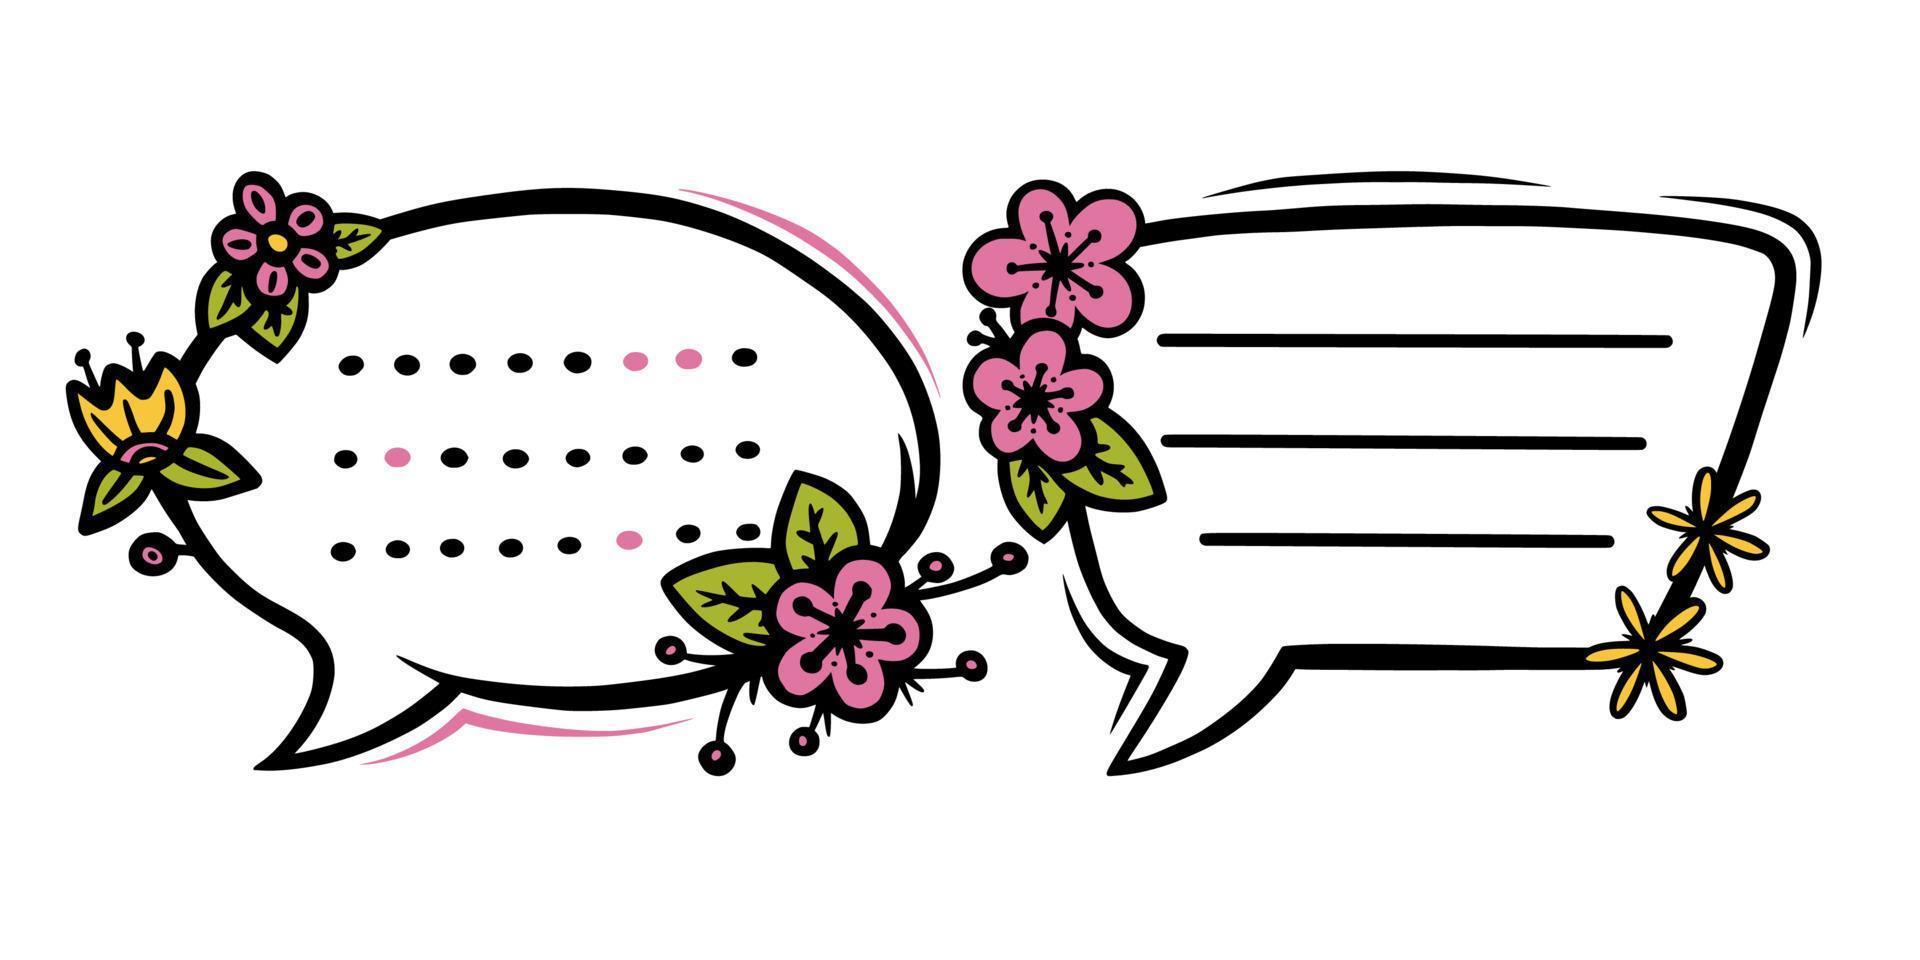 Floral speech bubbles or labels for scrapbooks decoration. Frames with flowers for text or message. Doodle vector illustration